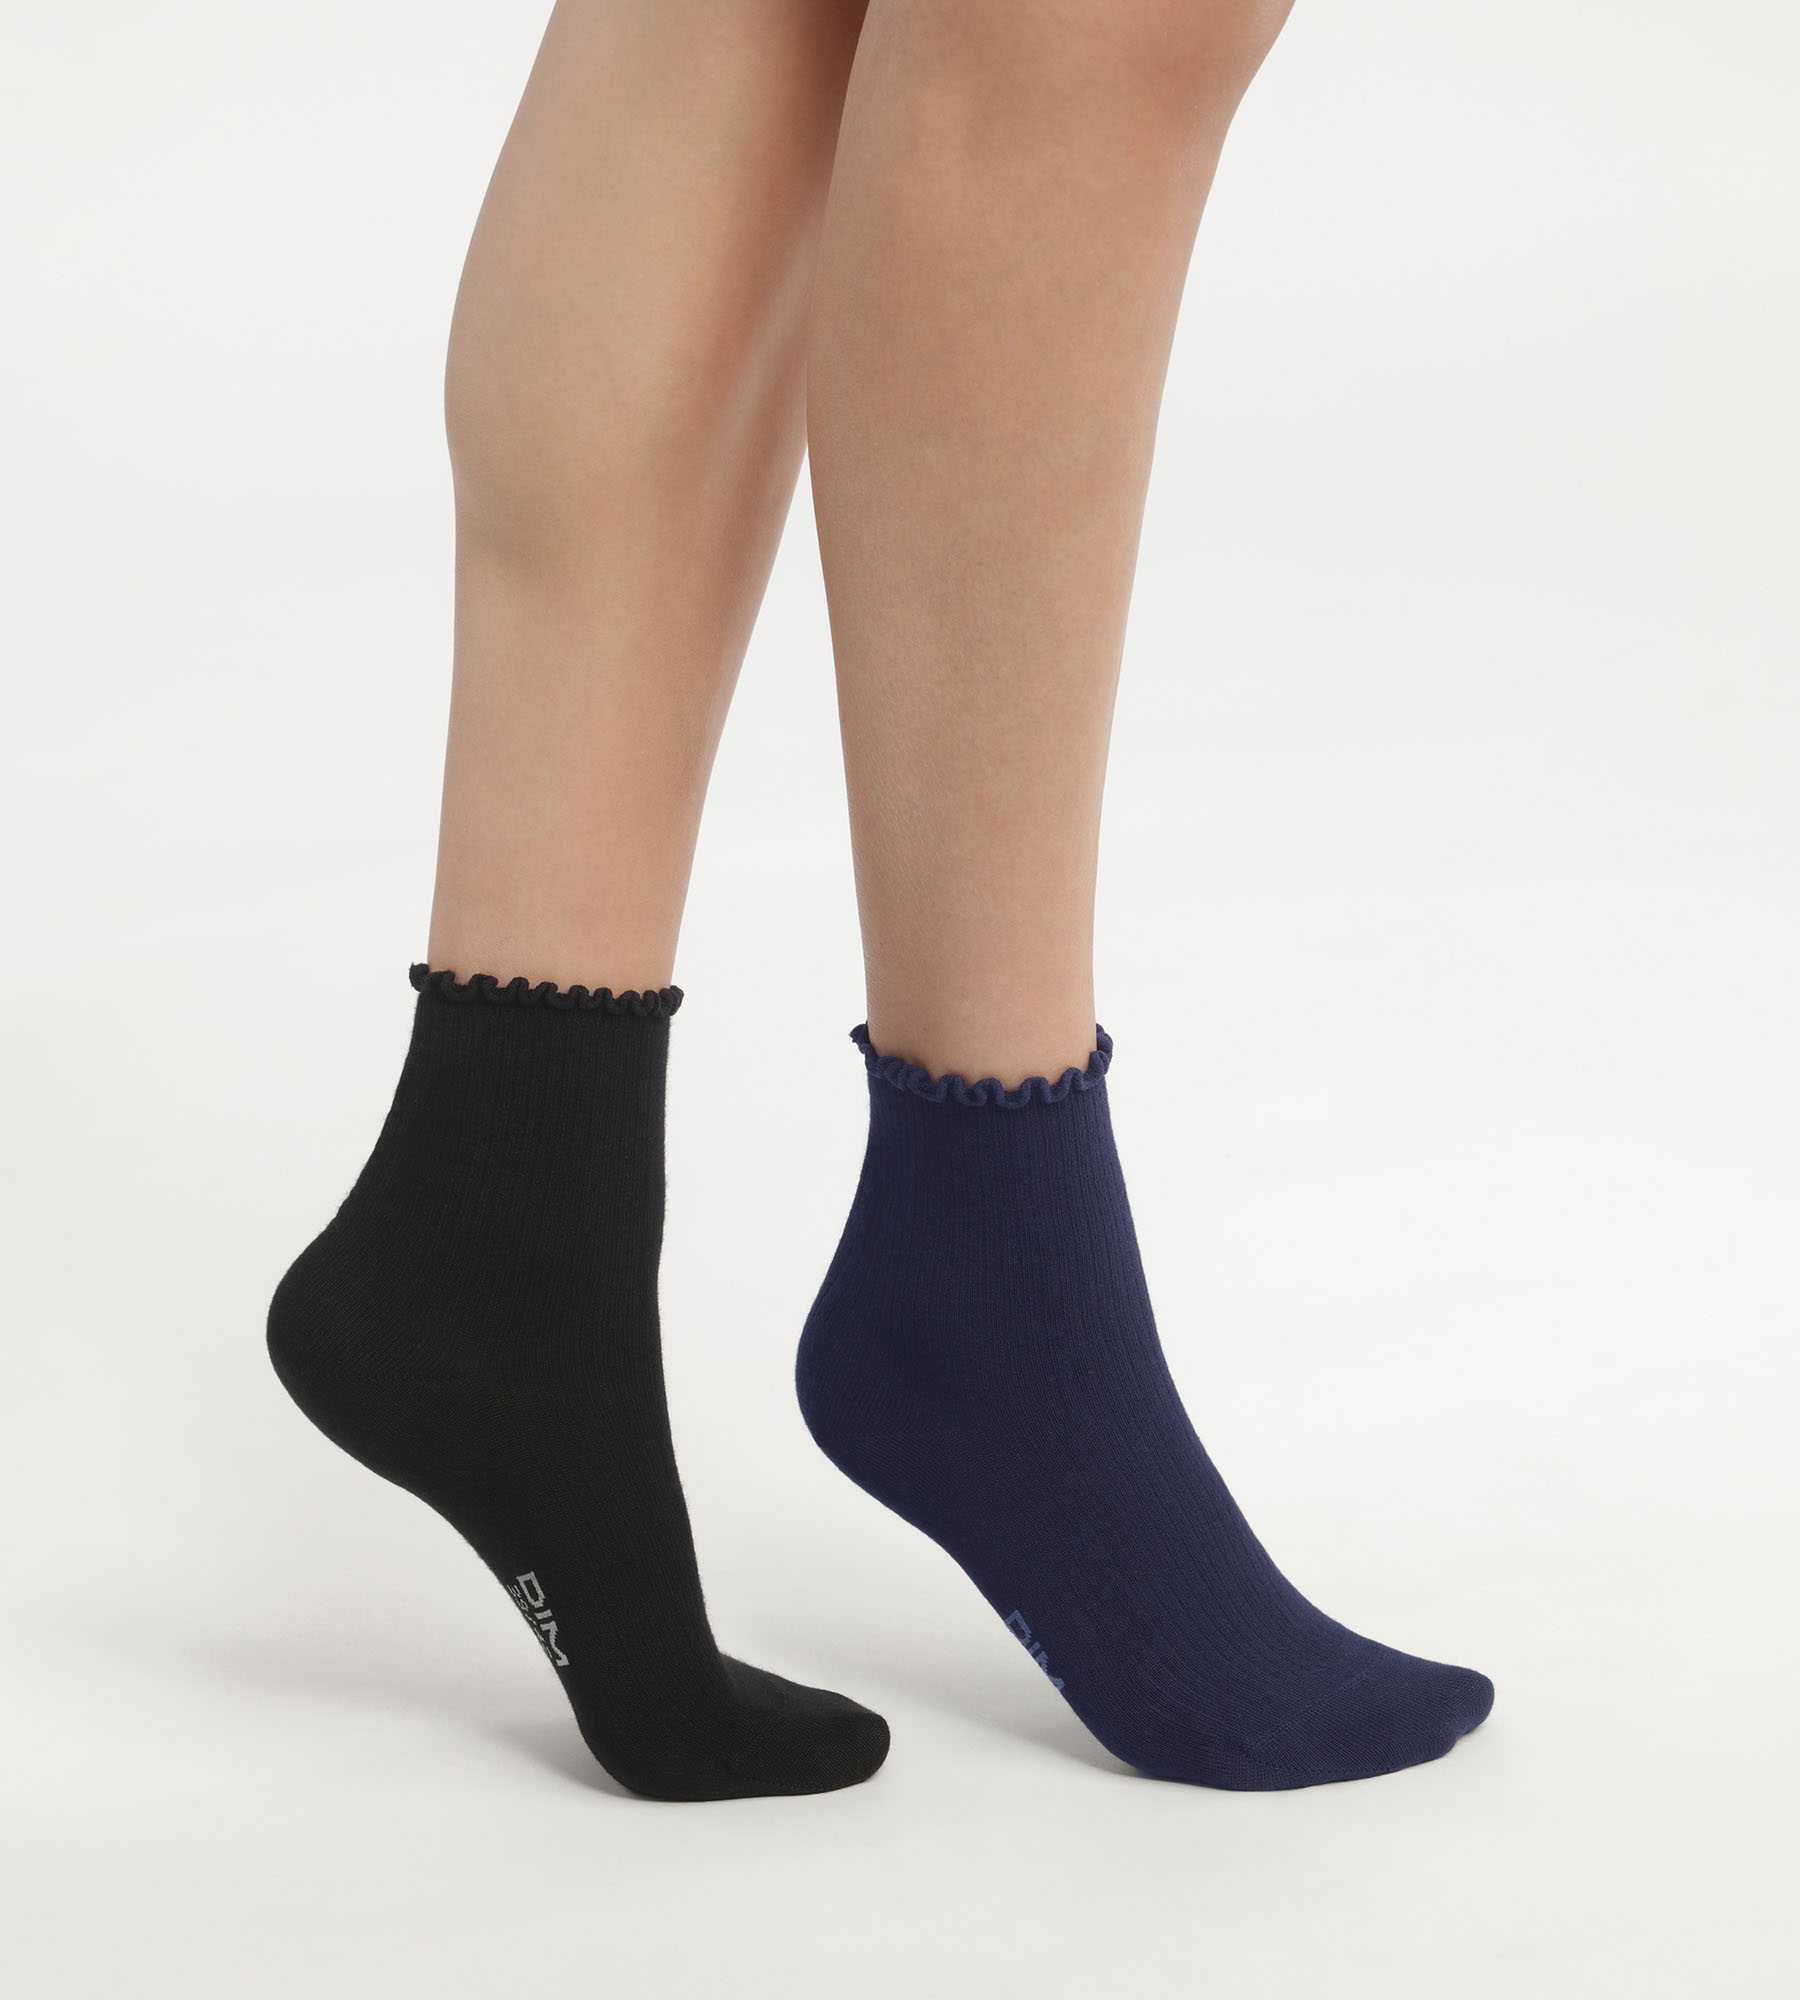 Pack of 2 pairs of women’s second skin ankle socks in black